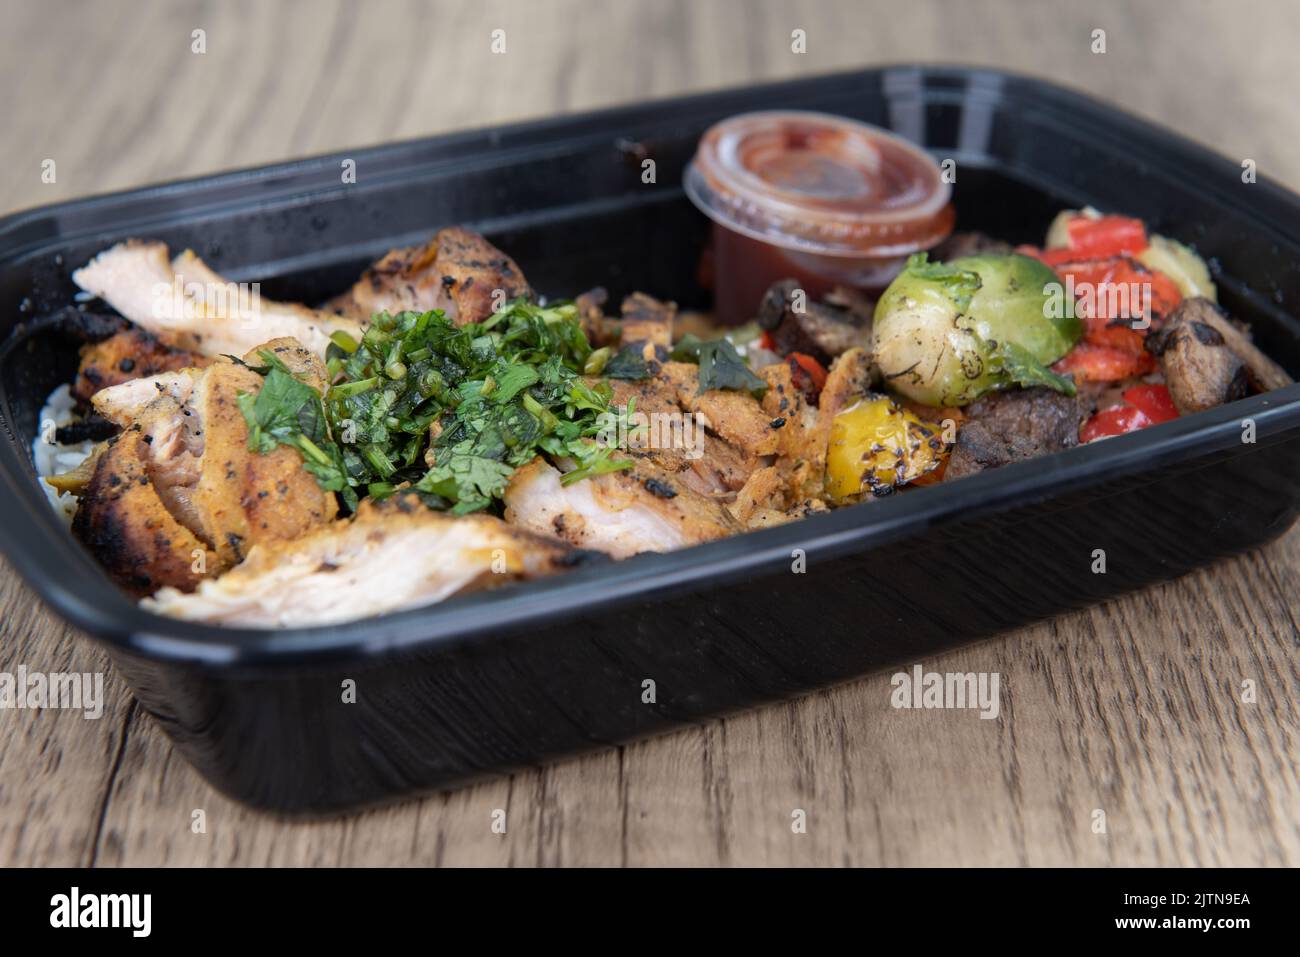 Take out order of shawarma chicken with jasmin rice is conveniently packed in a microwavable container. Stock Photo